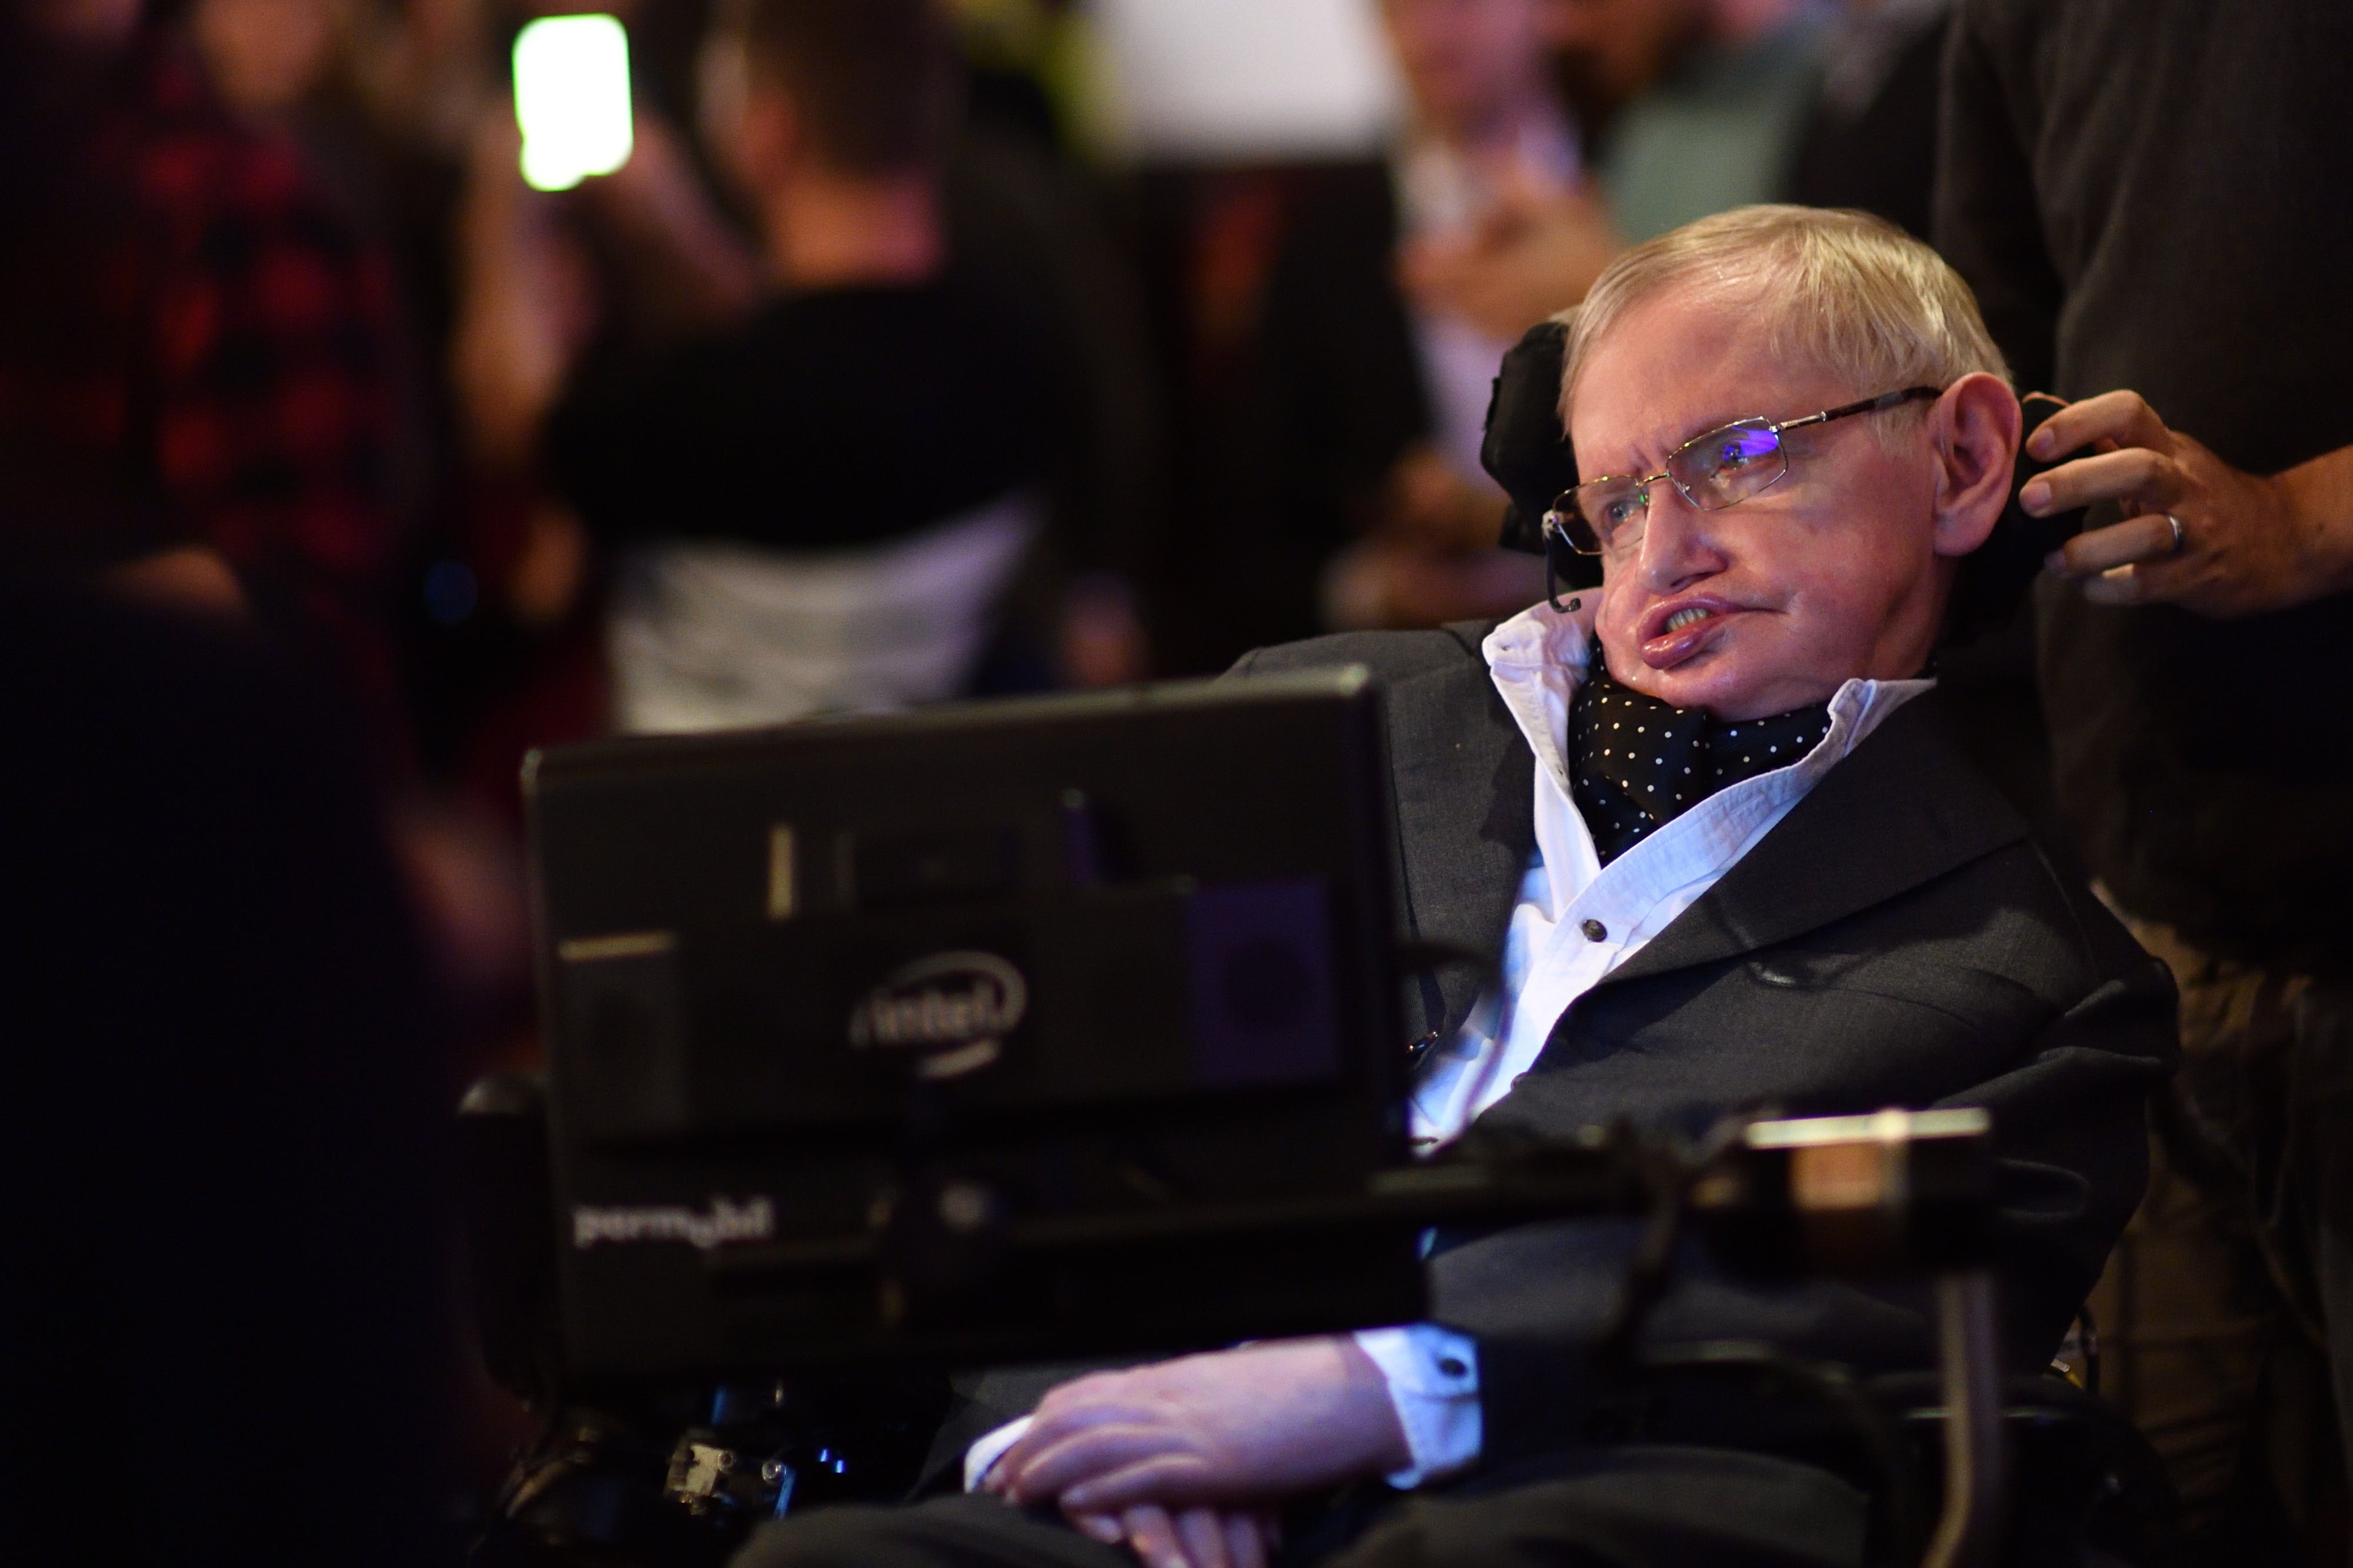 kompleksitet stemning lejr How Has Stephen Hawking Lived Past 70 with ALS? - Scientific American